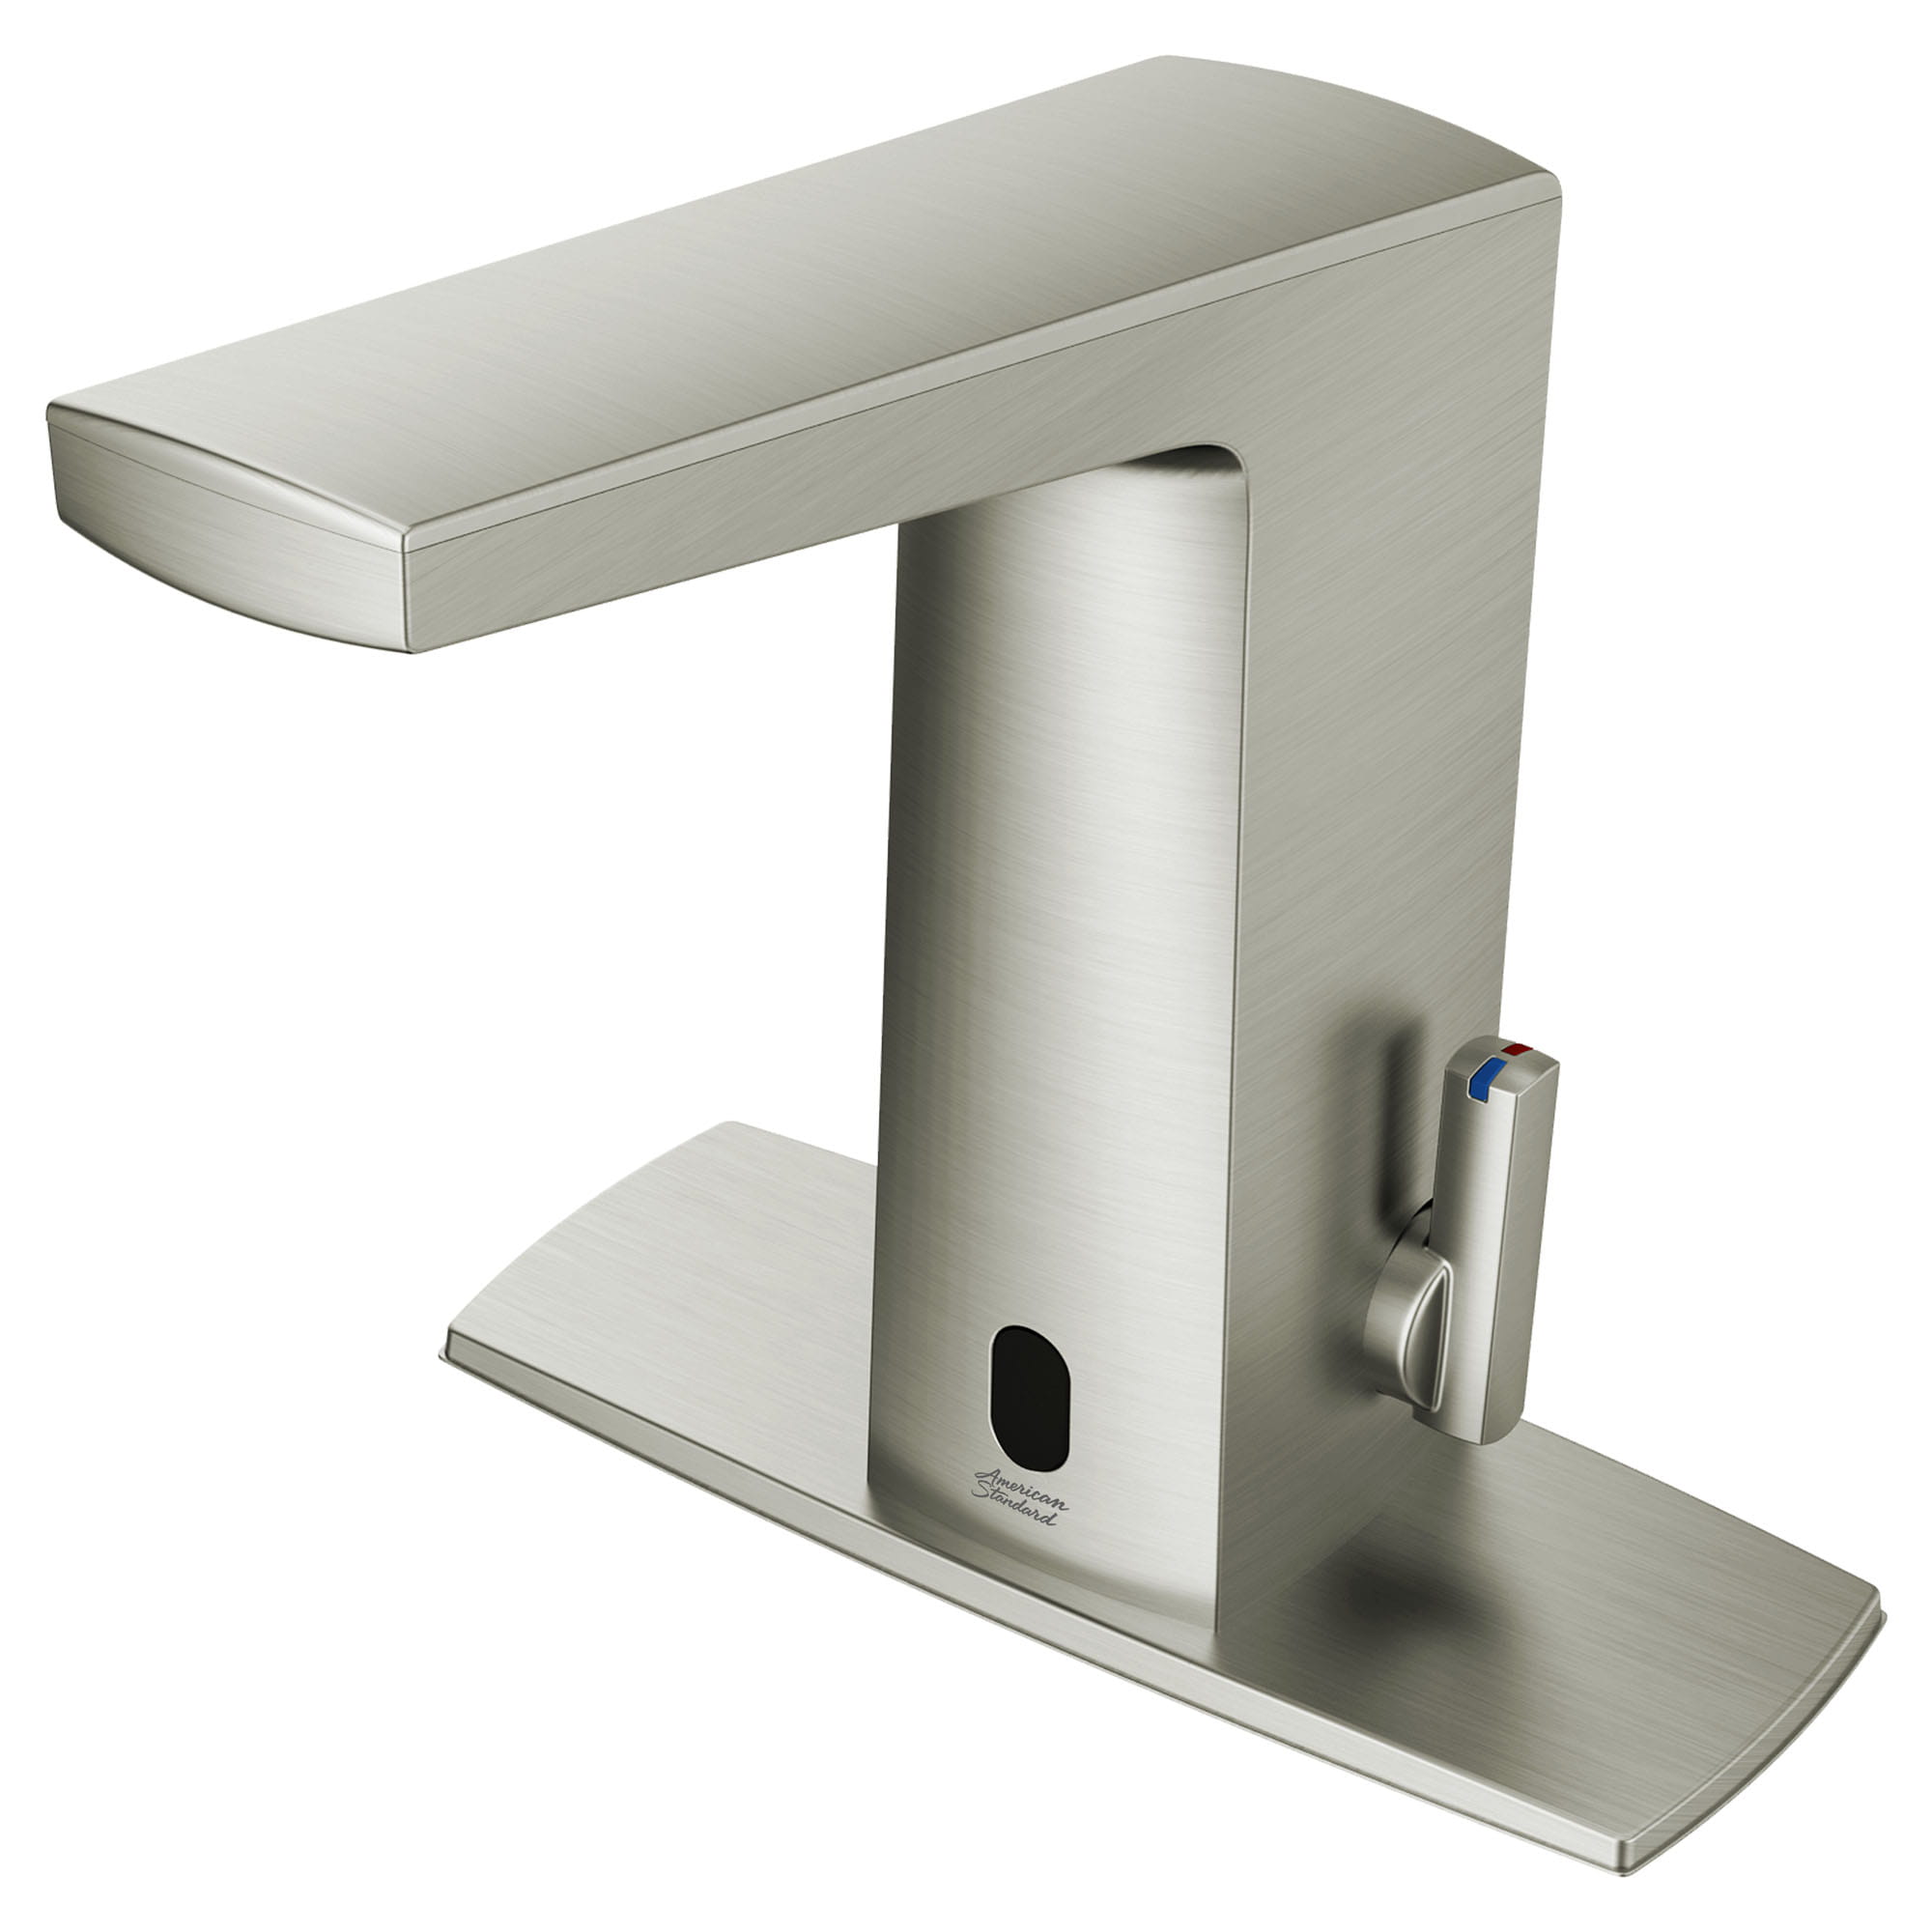 Paradigm® Selectronic® Touchless Faucet, Battery-Powered With Above-Deck Mixing, 0.35 gpm/1.3 Lpm